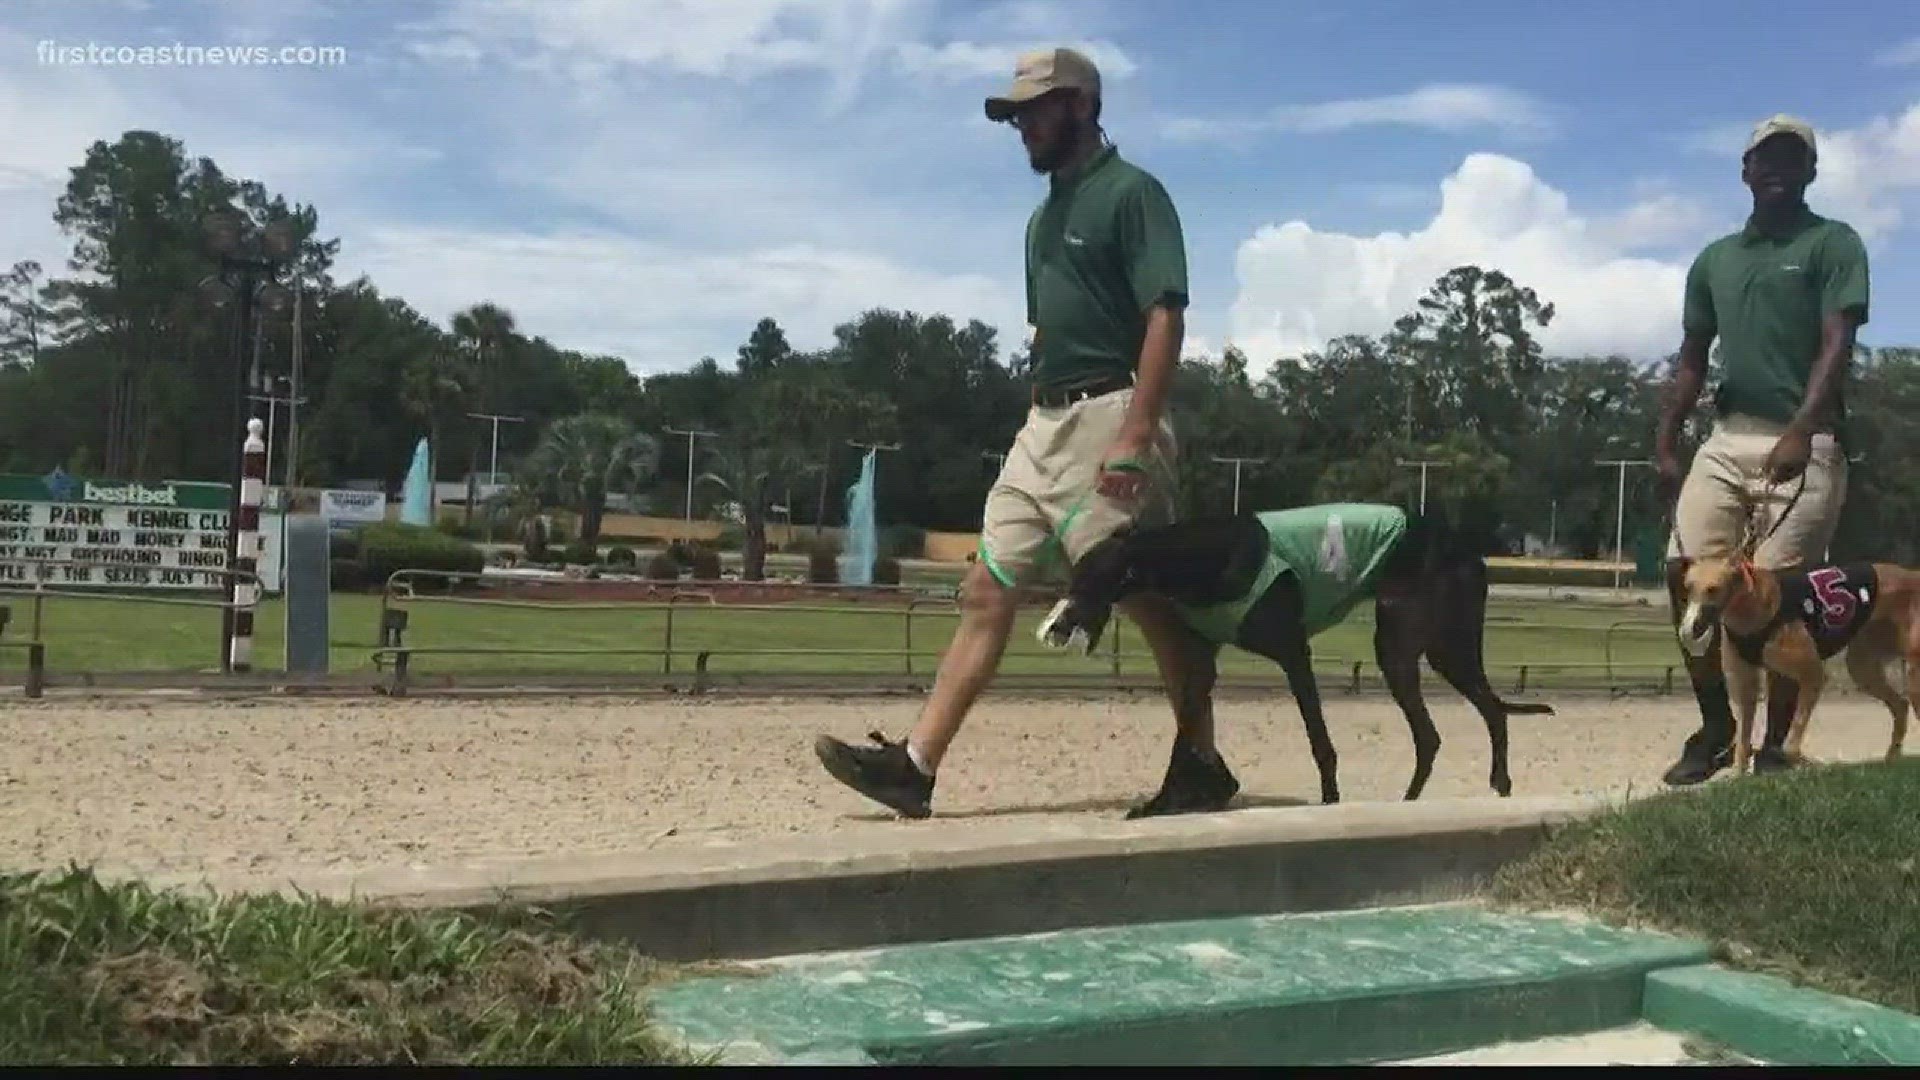 FCN's Julia Jenae has an update on the ongoing controversy surrounding greyhound racing and drug testing.